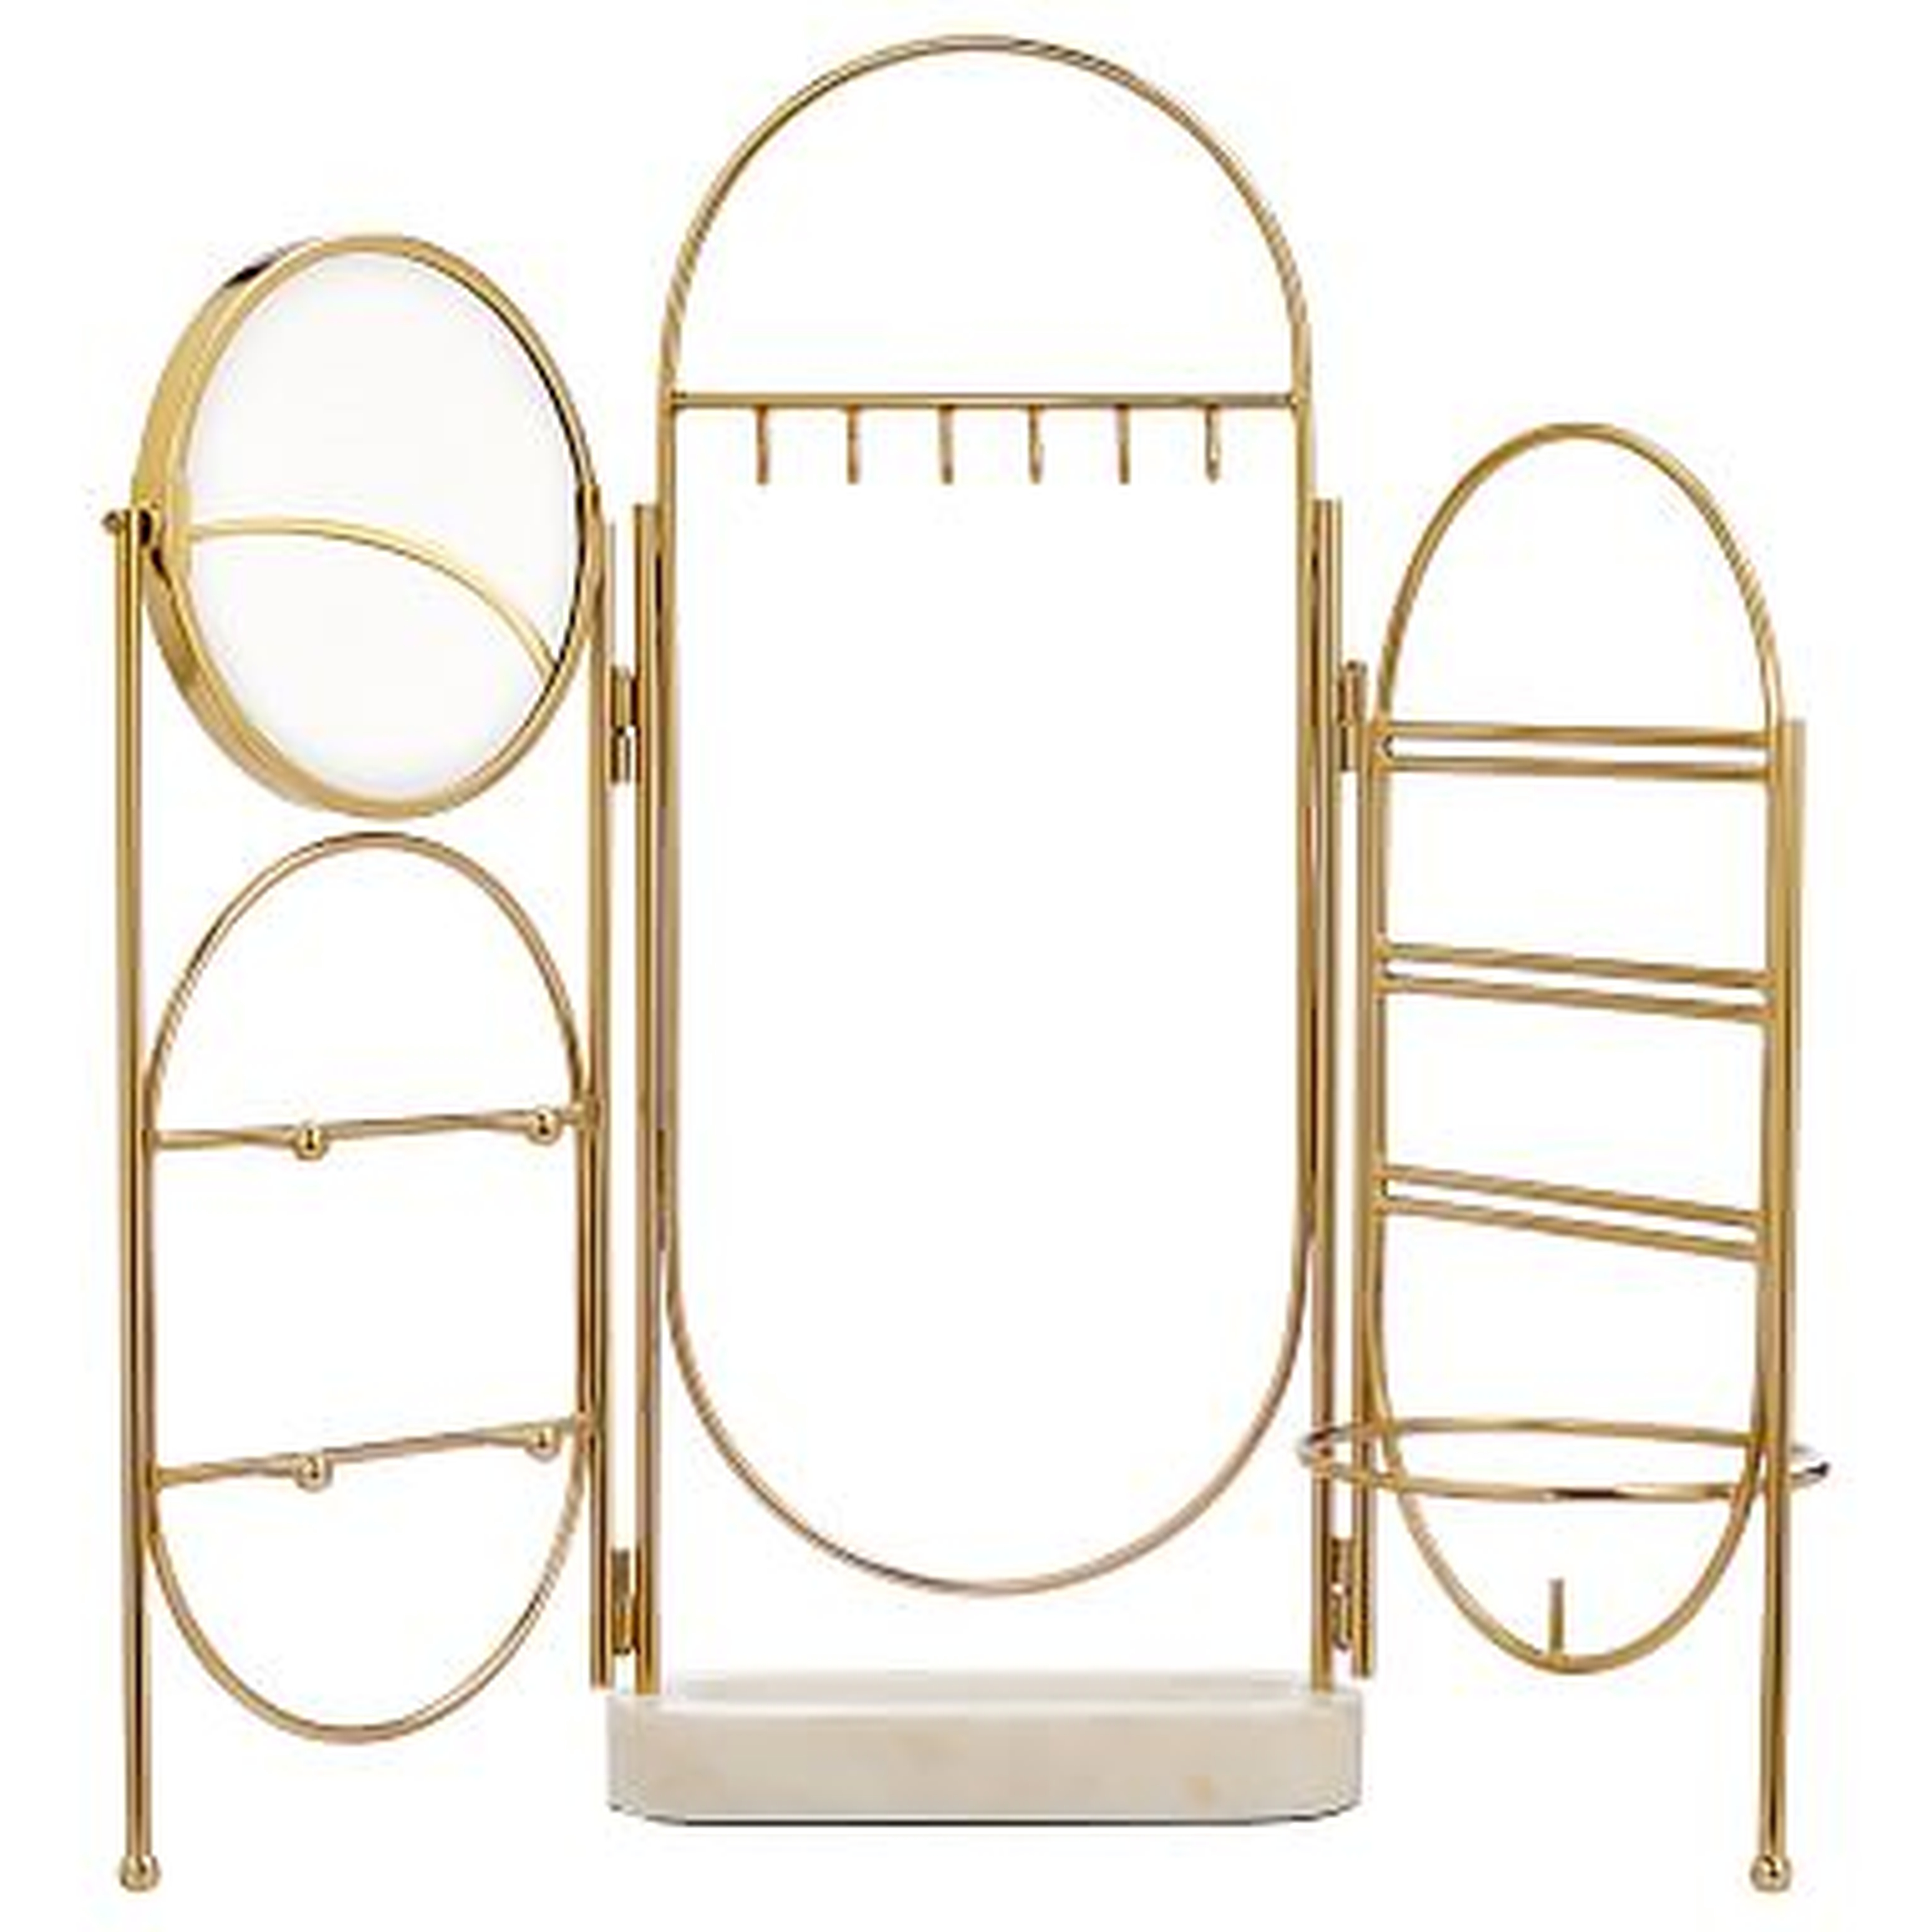 Marble and Gold Jewelry Holder Screen - Pottery Barn Teen